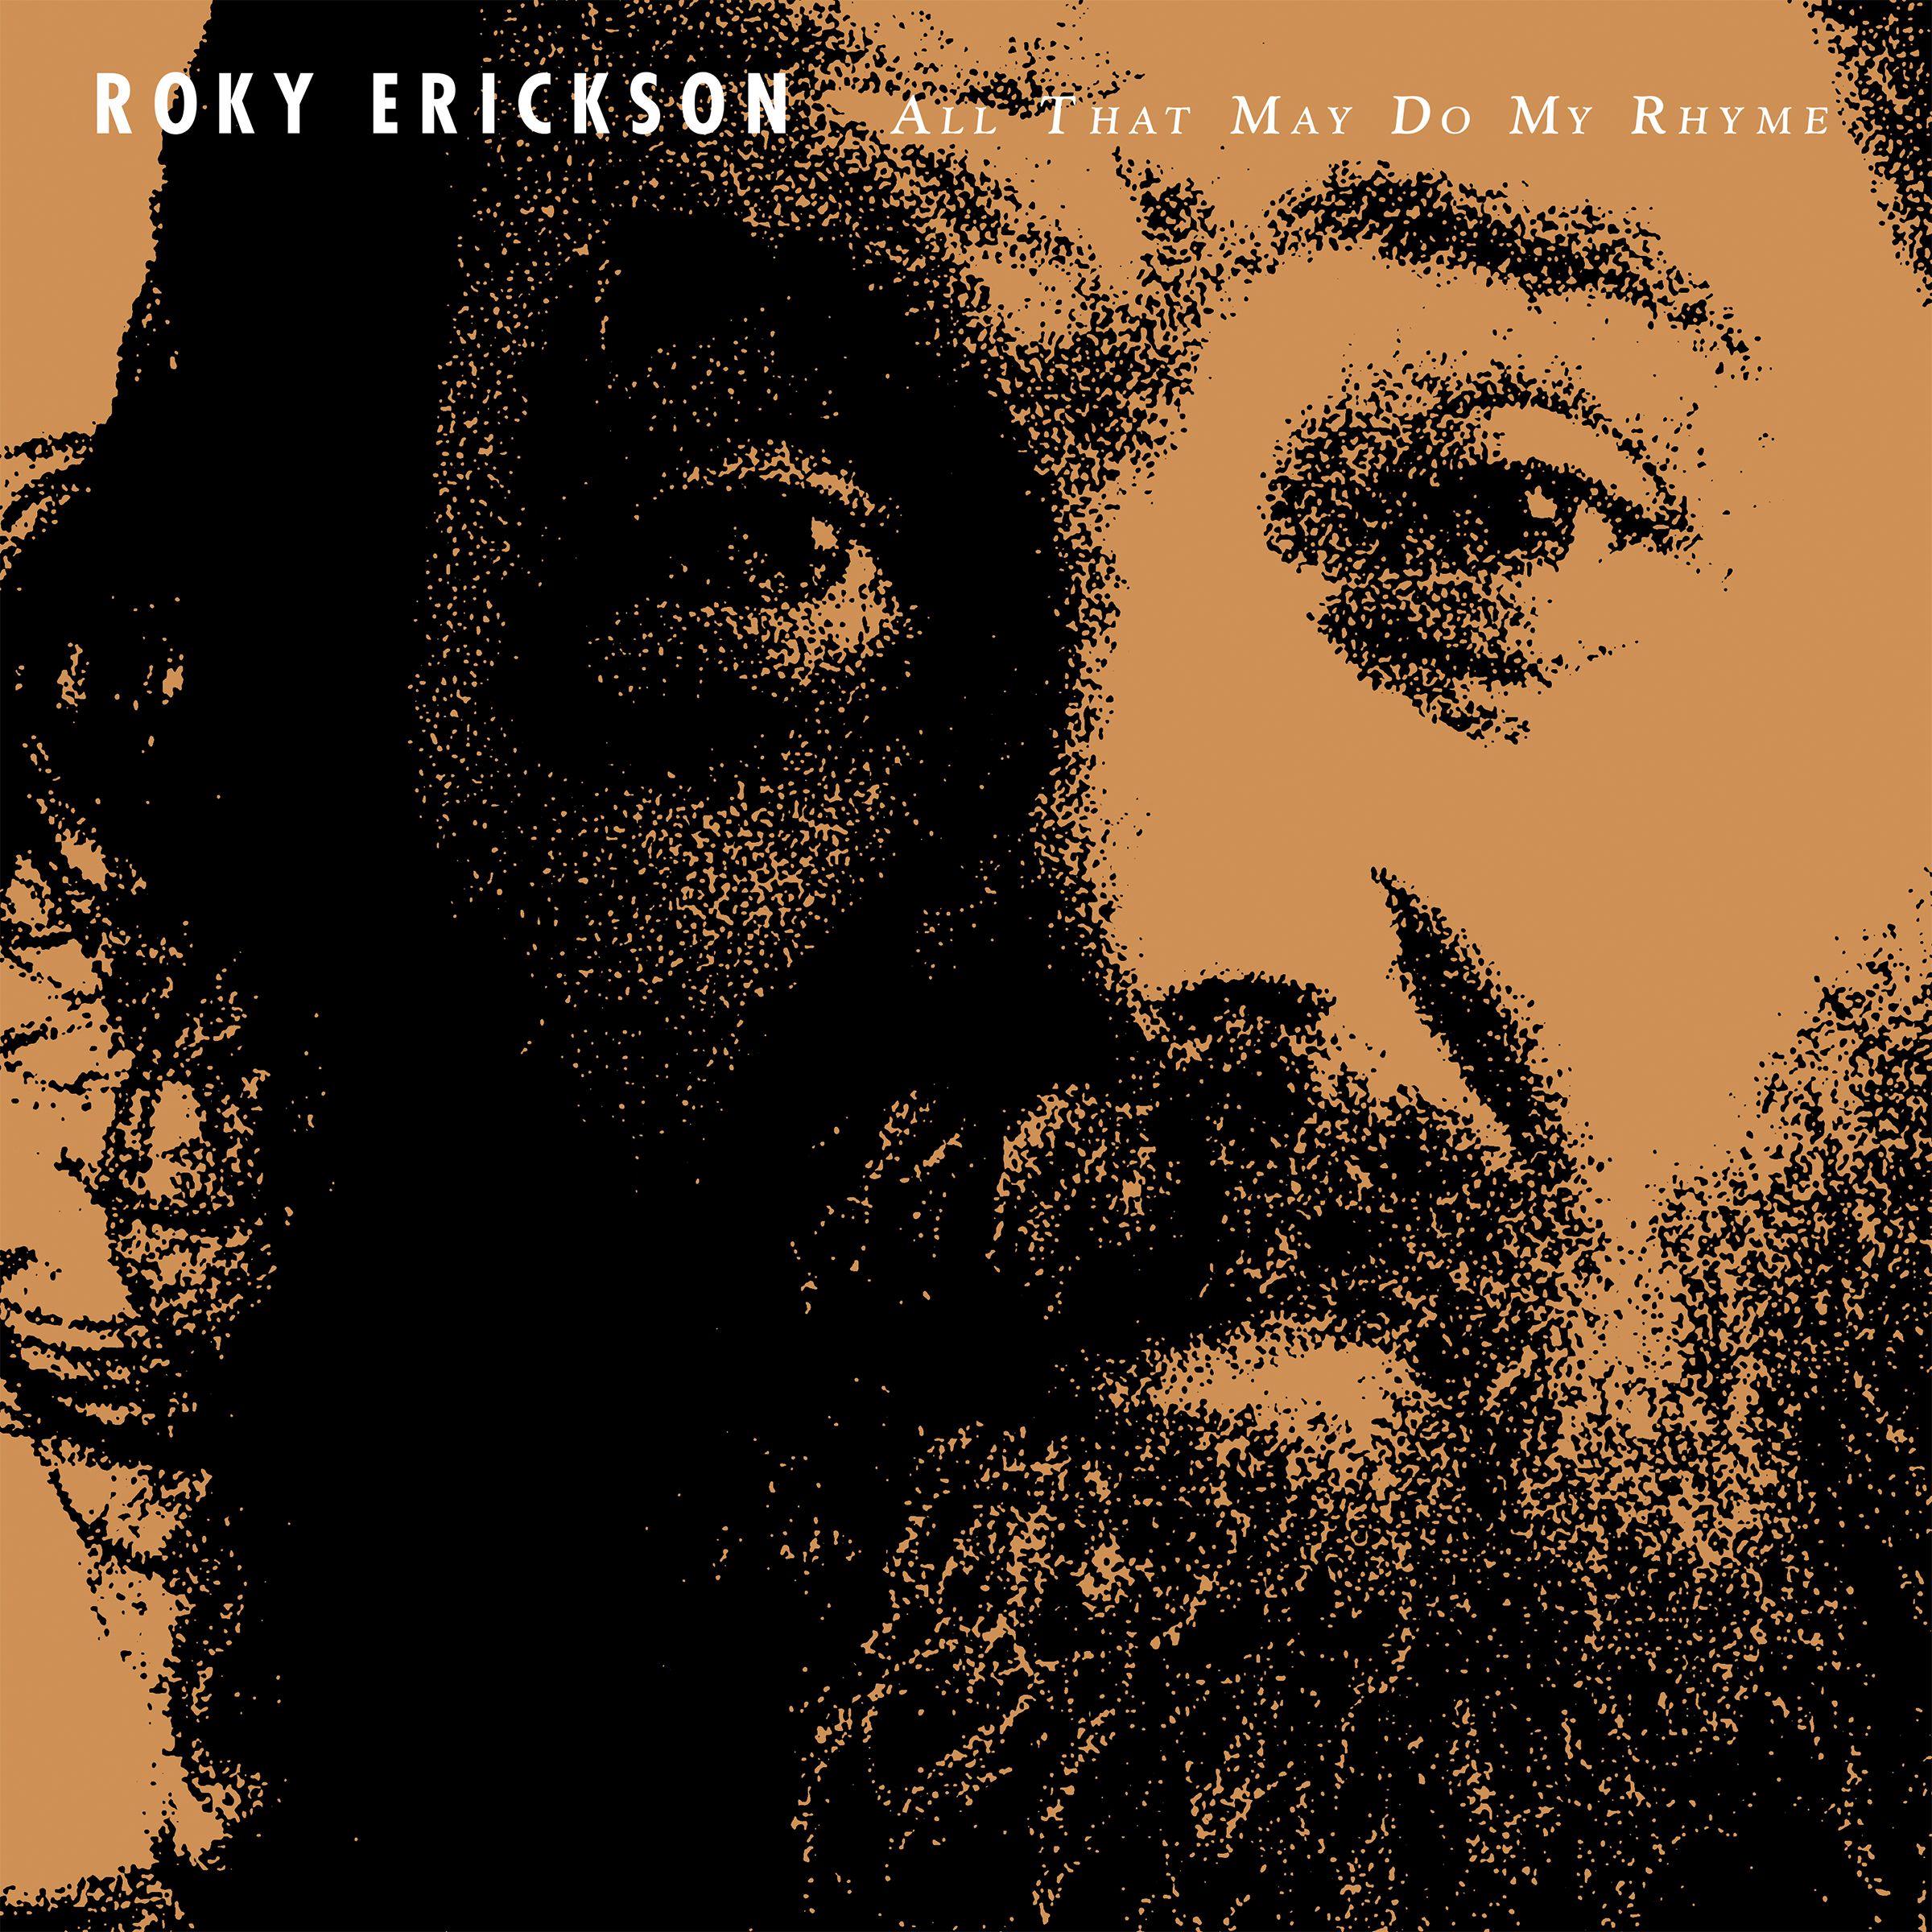 Erickson, Roky - All That May Do My Rhyme (white LP limited)